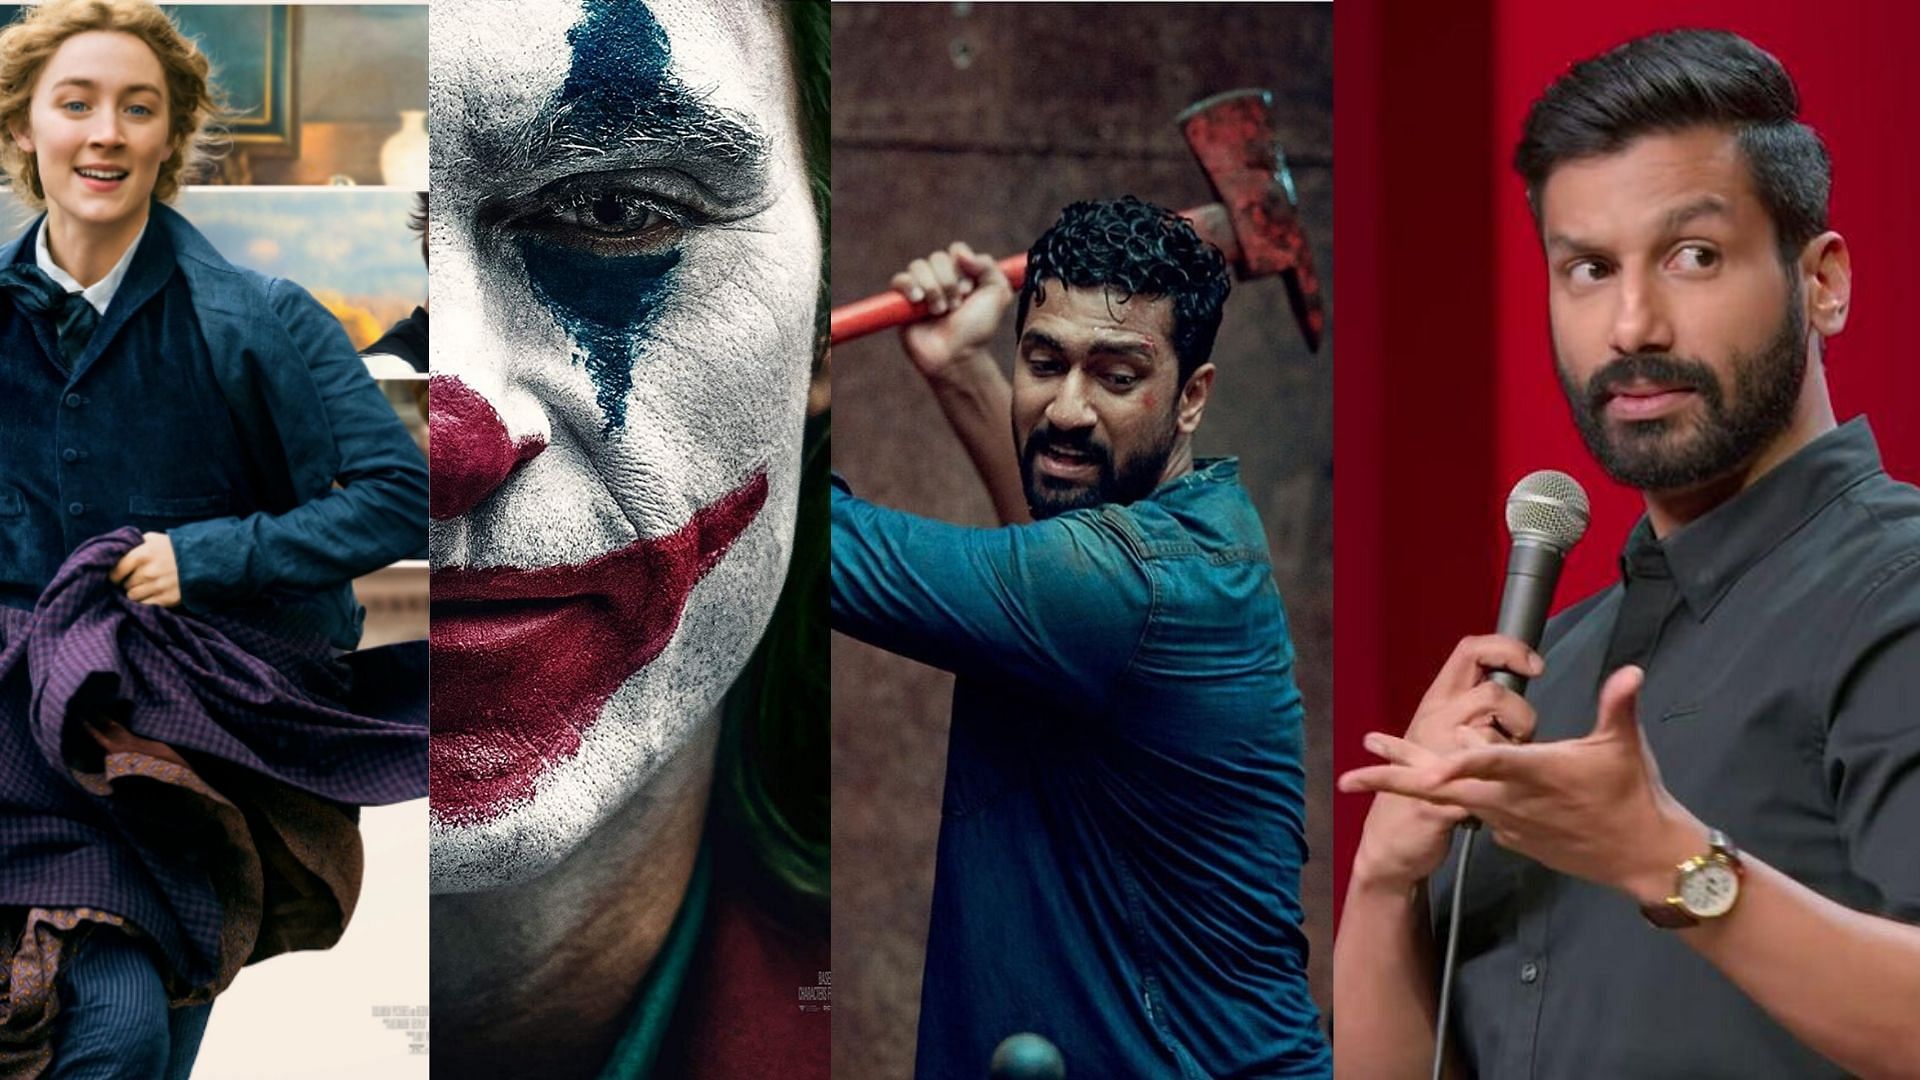 Joker, Little Women, Extraction, Kanan Gills Comedy Special List of Shows and Films You Can Watch on Prime Video and Netflix